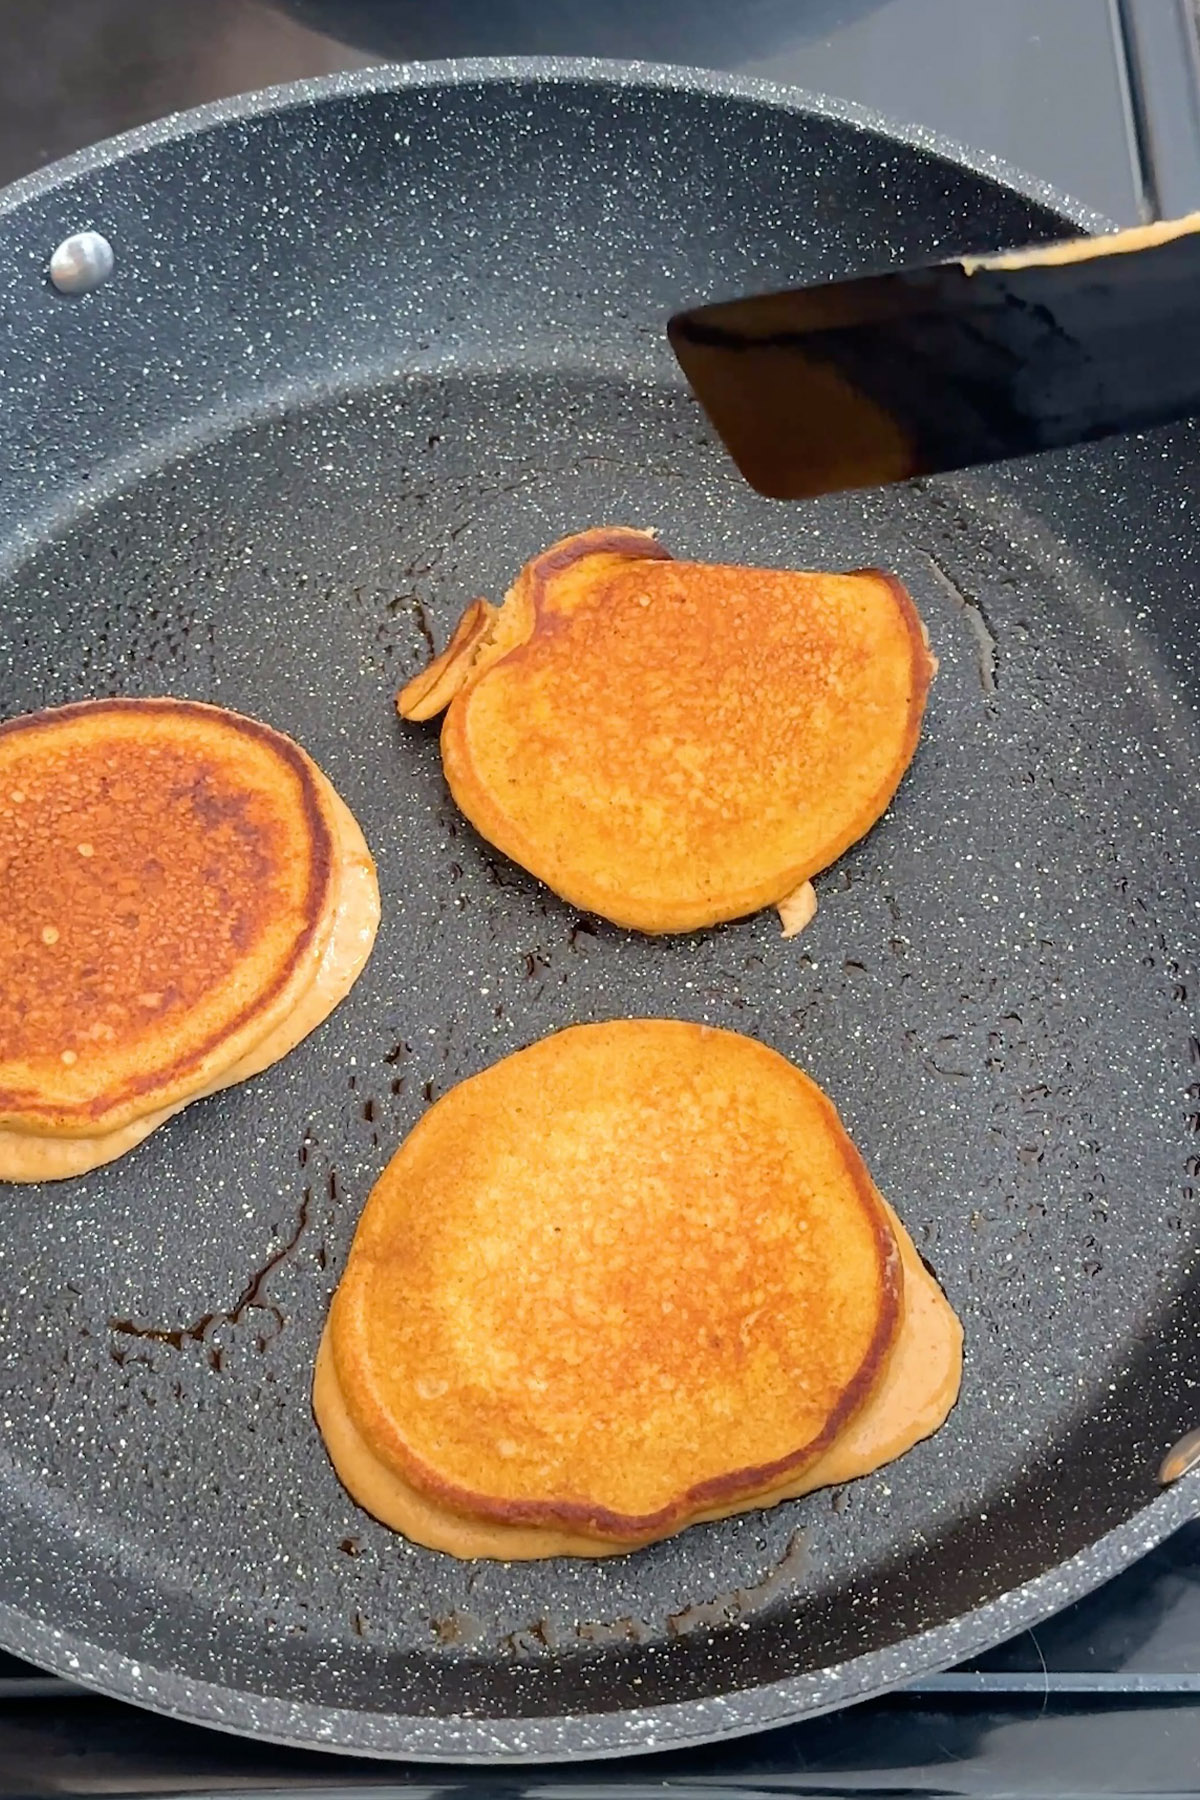 Pancakes are cooked in a skillet.